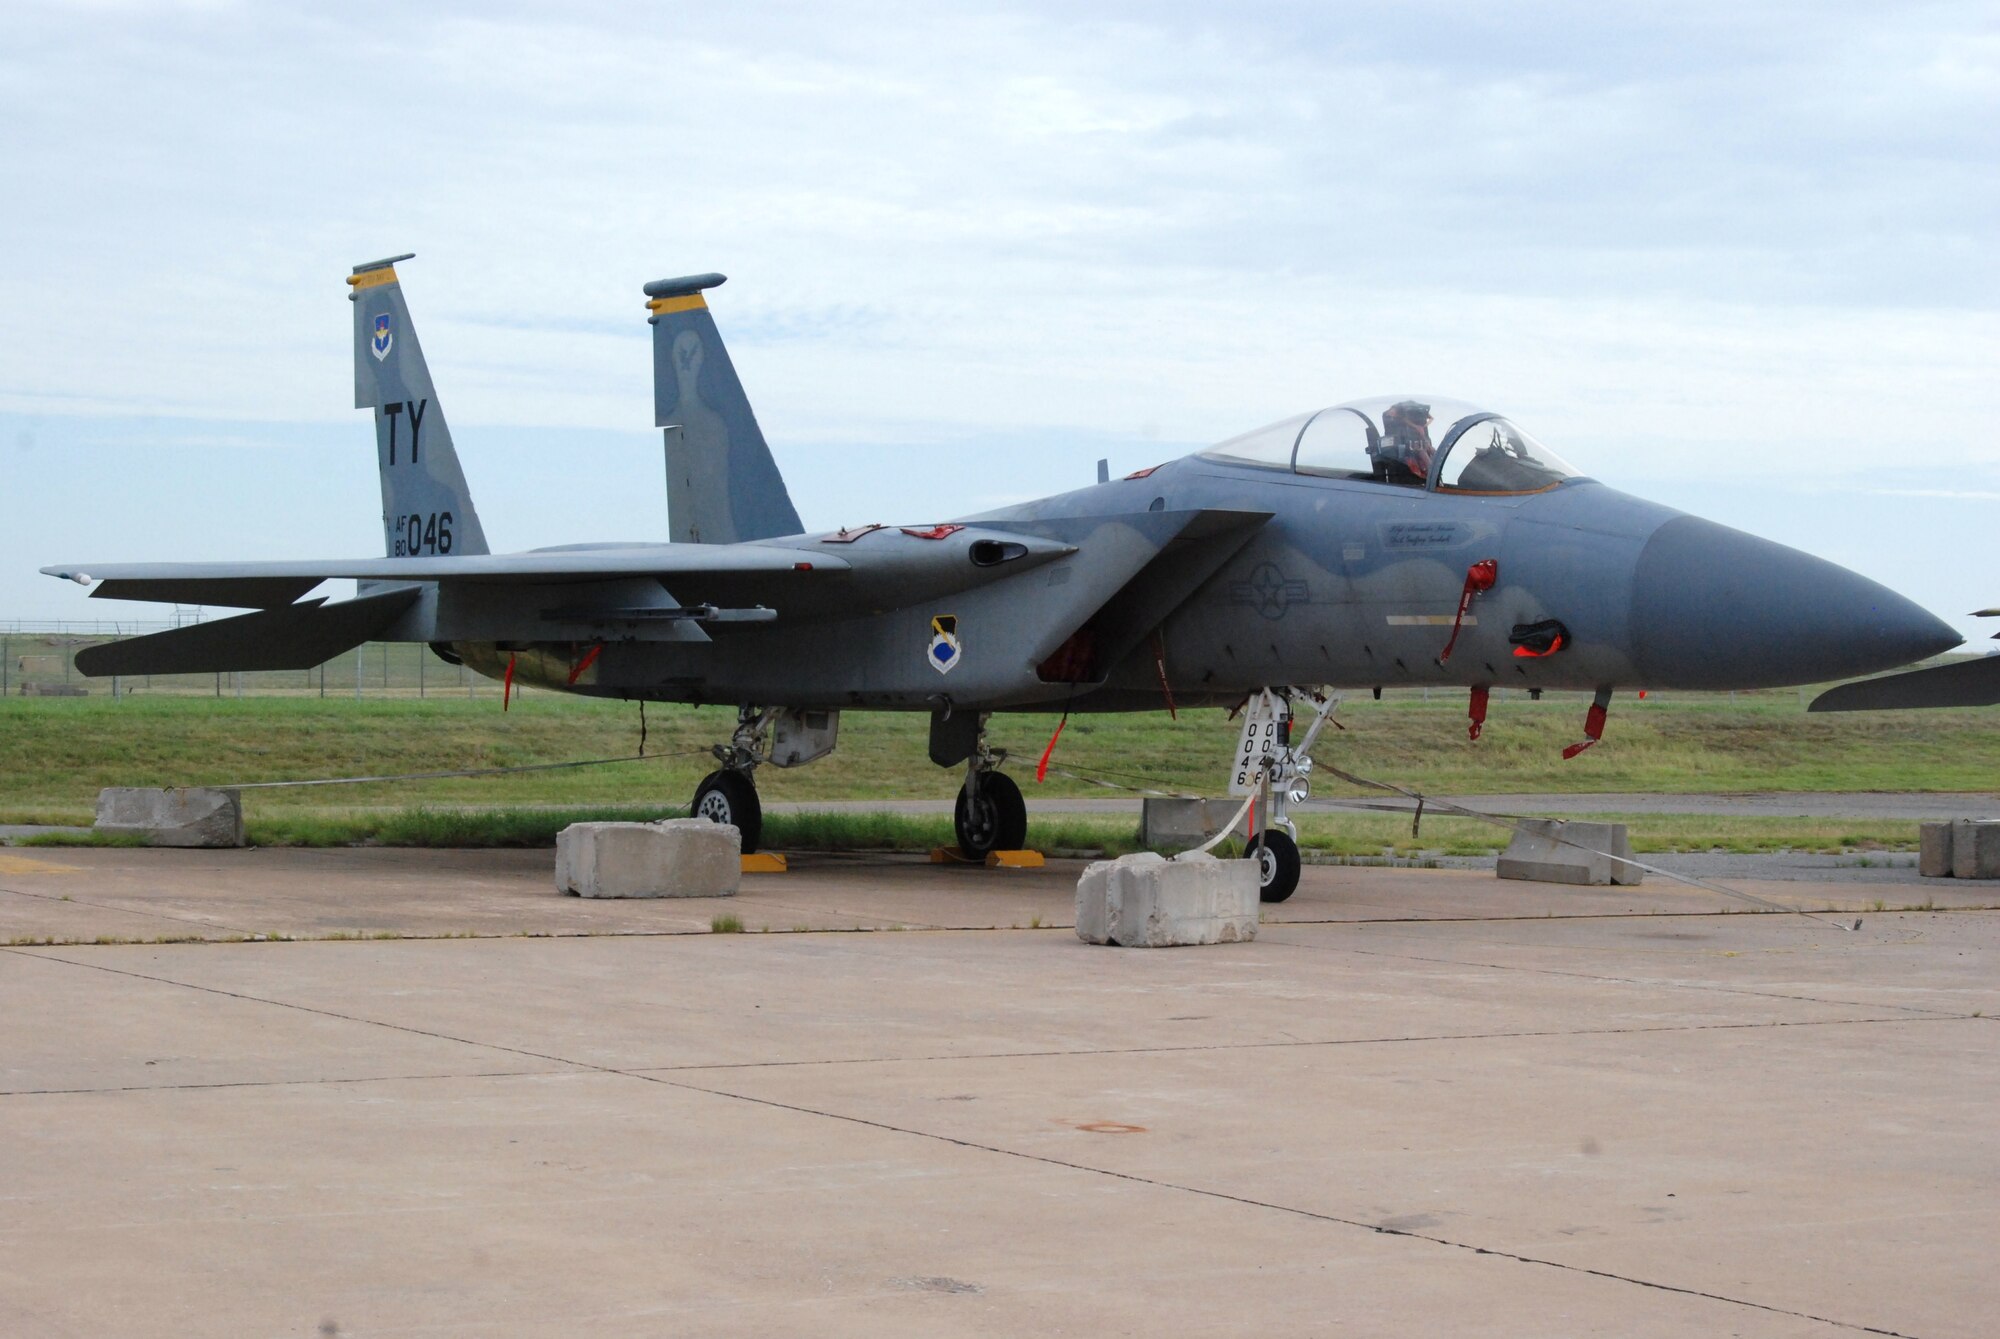 An F-15C is parked on the old Strategic Air Command ramp on Sheppard Air Force Base, Texas, July 23 after being altered to serve as a trainer for the 82nd Training Group and 782nd TRG F-15 courses. Sheppard acquired a total of 13 F-15s which were converted into trainers to update F-15 maintenance courses that used F-15A and F-15B models, which do not match the models currently used on operational flightlines.  (U.S. Air Force photo/Tech. Sgt. Vernon Cunningham)